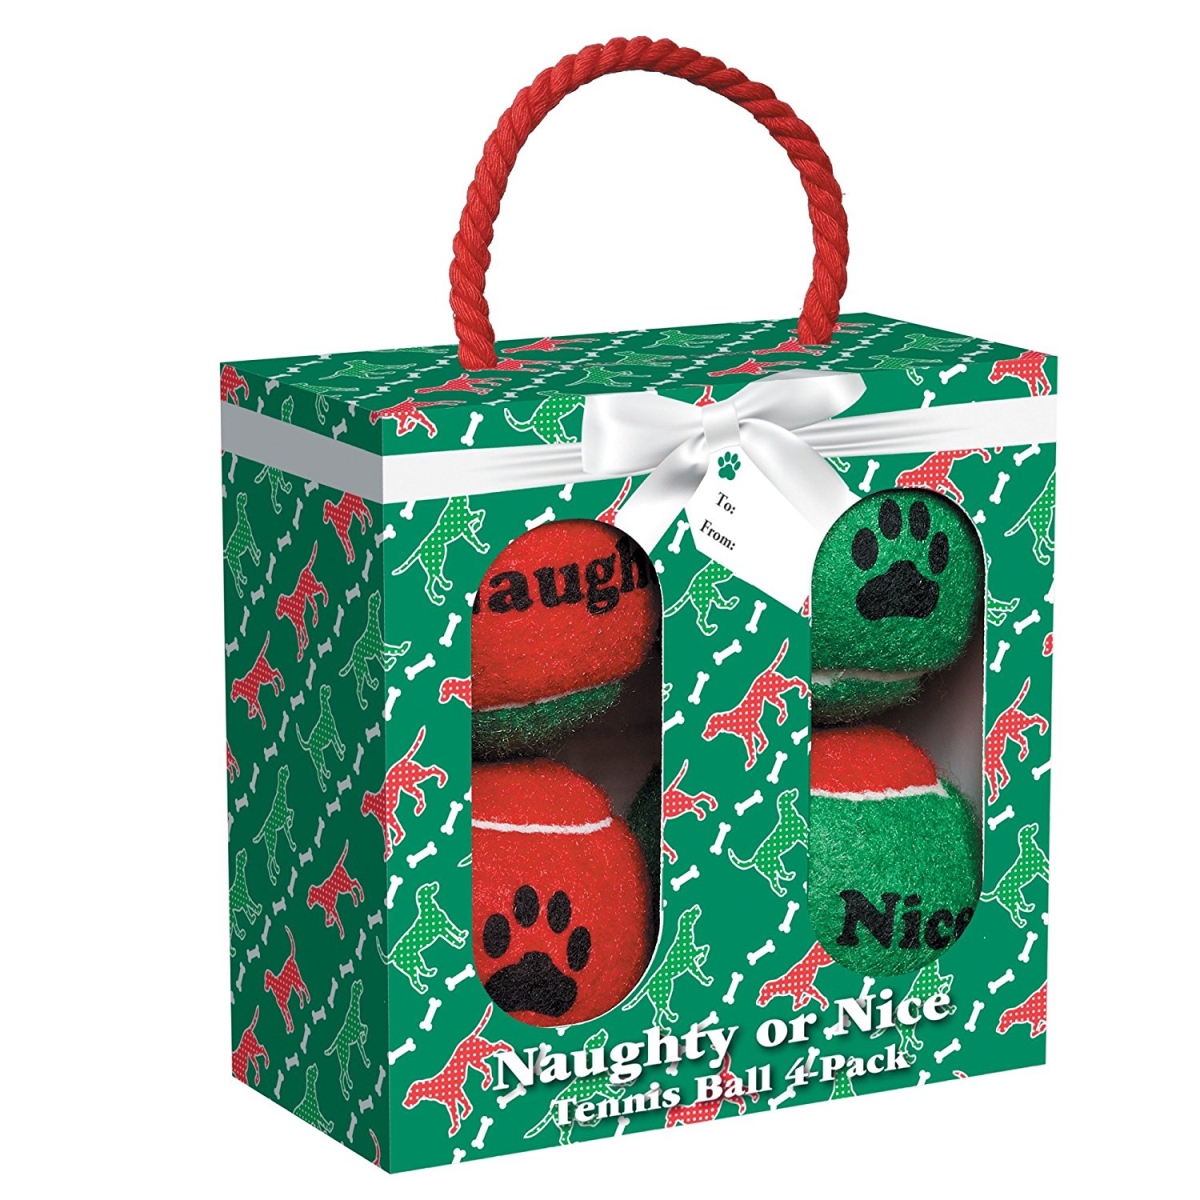 Grriggles Naughty Or Nice Tennis Balls For Dogs - Pack Of 4